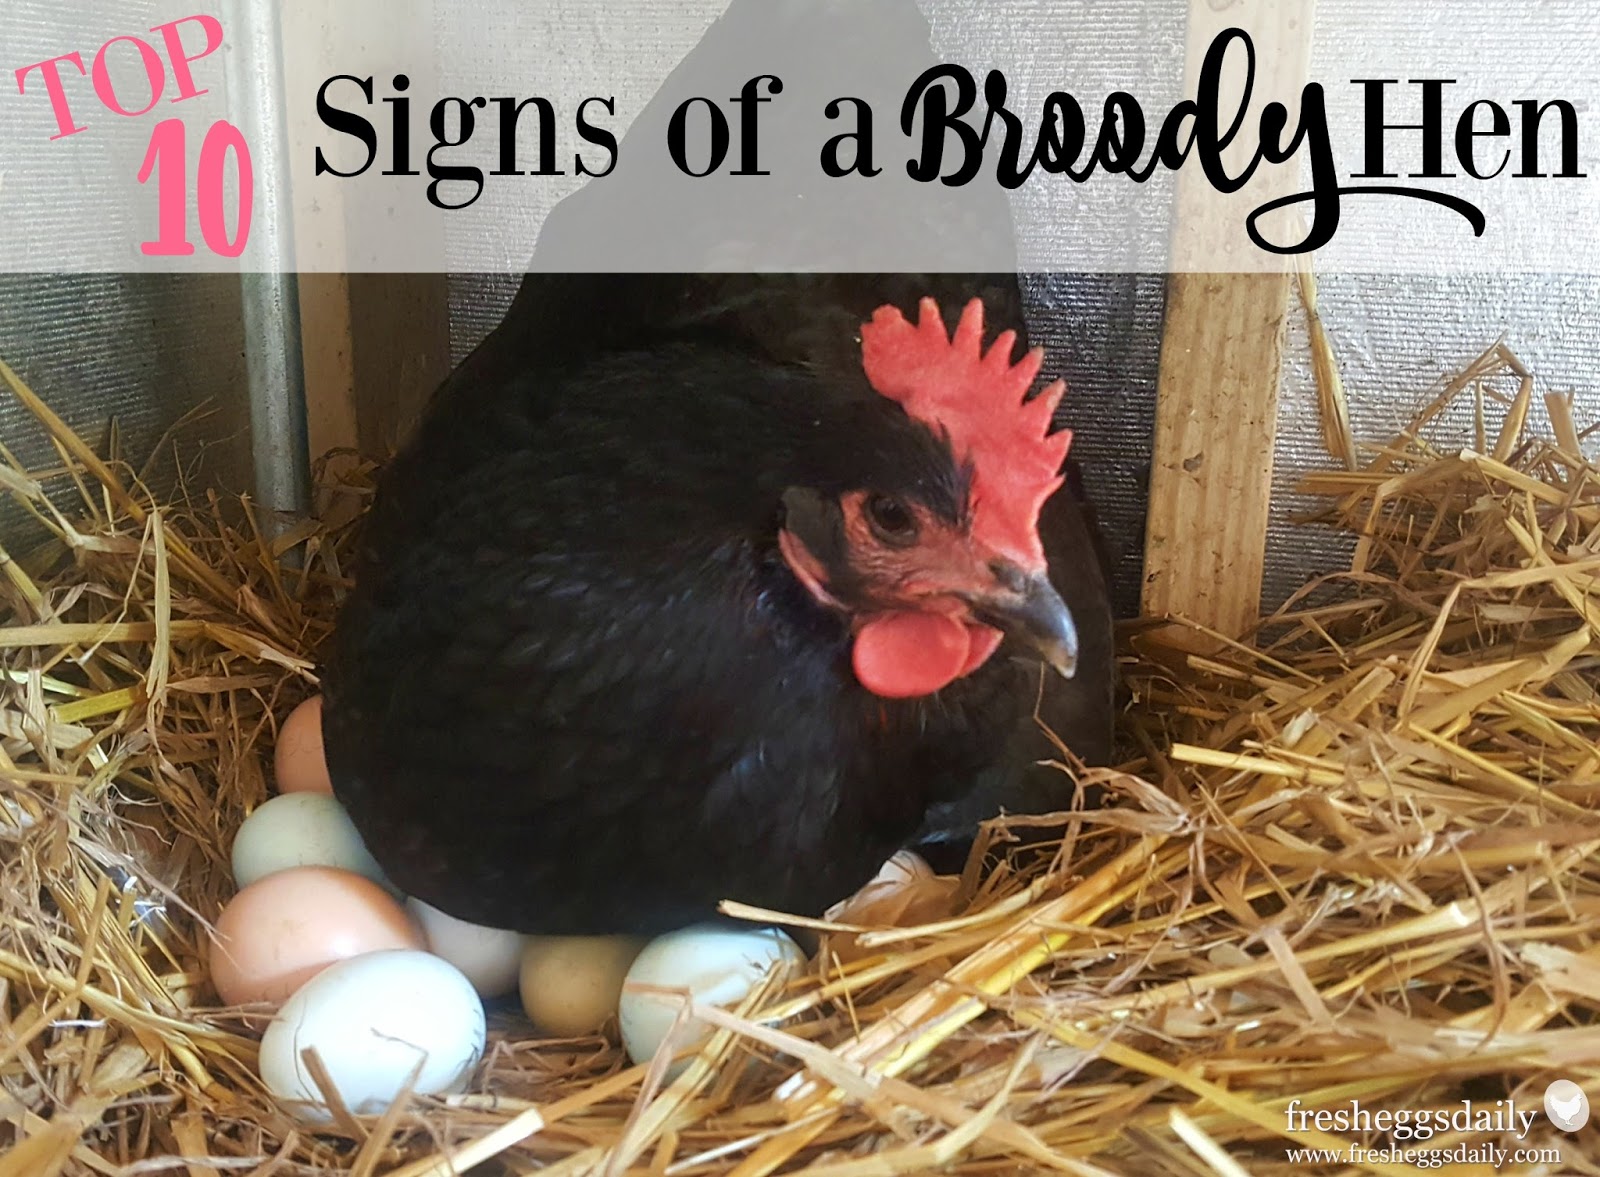 II. Signs of a Broody Hen